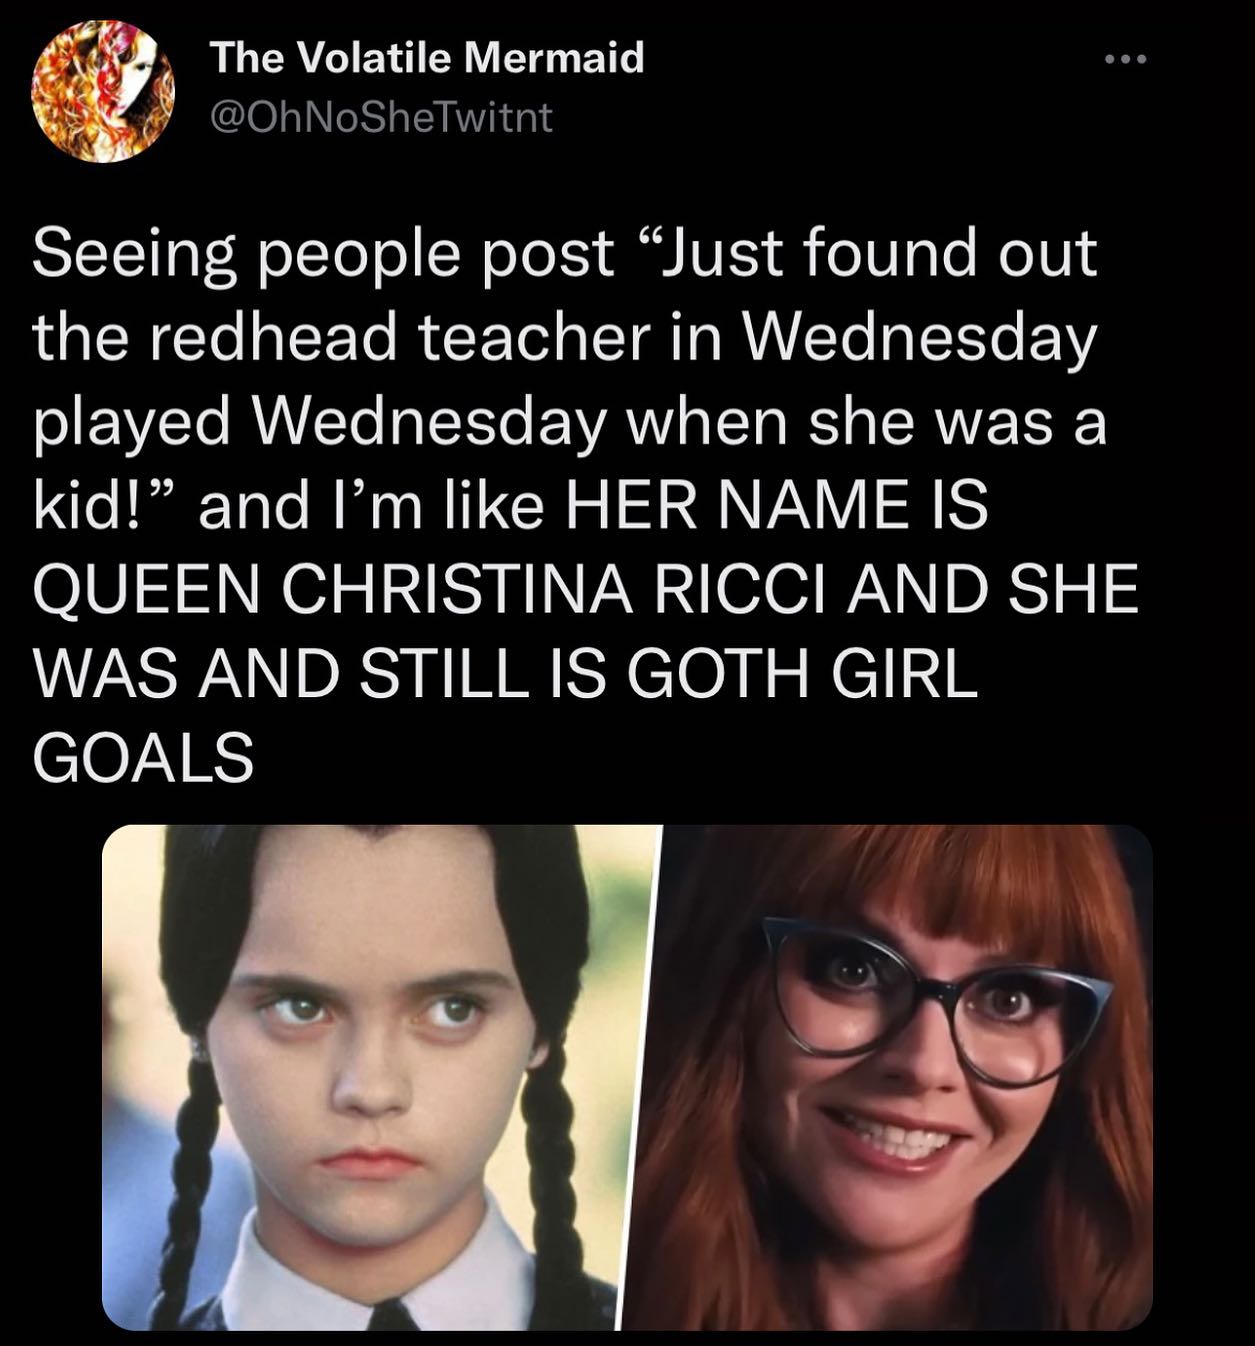 funny pics and memes - christina ricci - The Volatile Mermaid Seeing people post "Just found out the redhead teacher in Wednesday played Wednesday when she was a kid!" and I'm Her Name Is Queen Christina Ricci And She Was And Still Is Goth Girl Goals